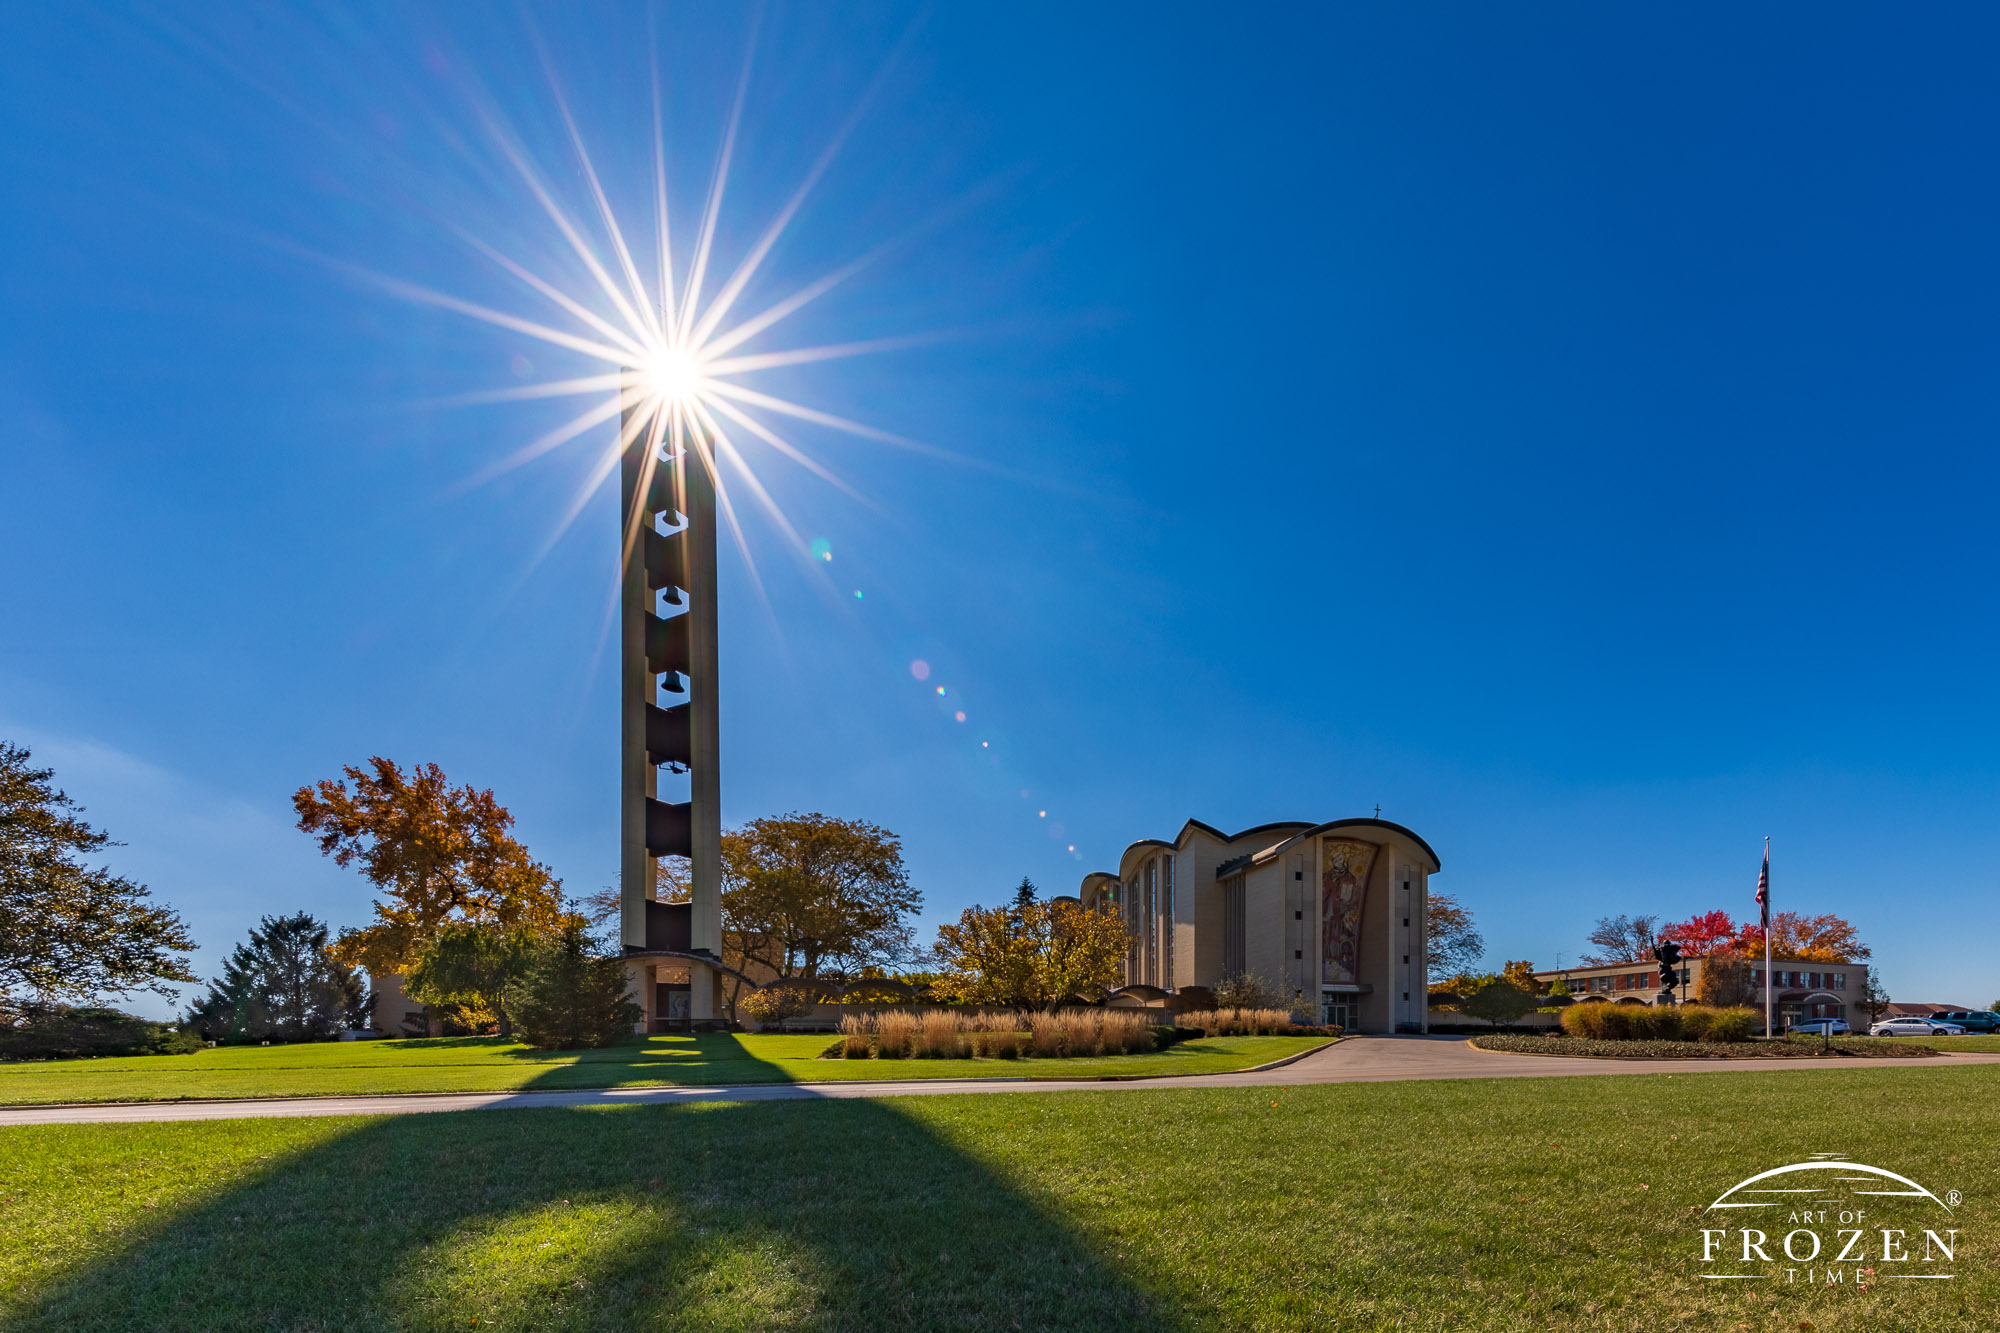 The sun forms a starburst which shines through the top of St Leonard Bell Tower which contrasts brightly against the blue fall skies